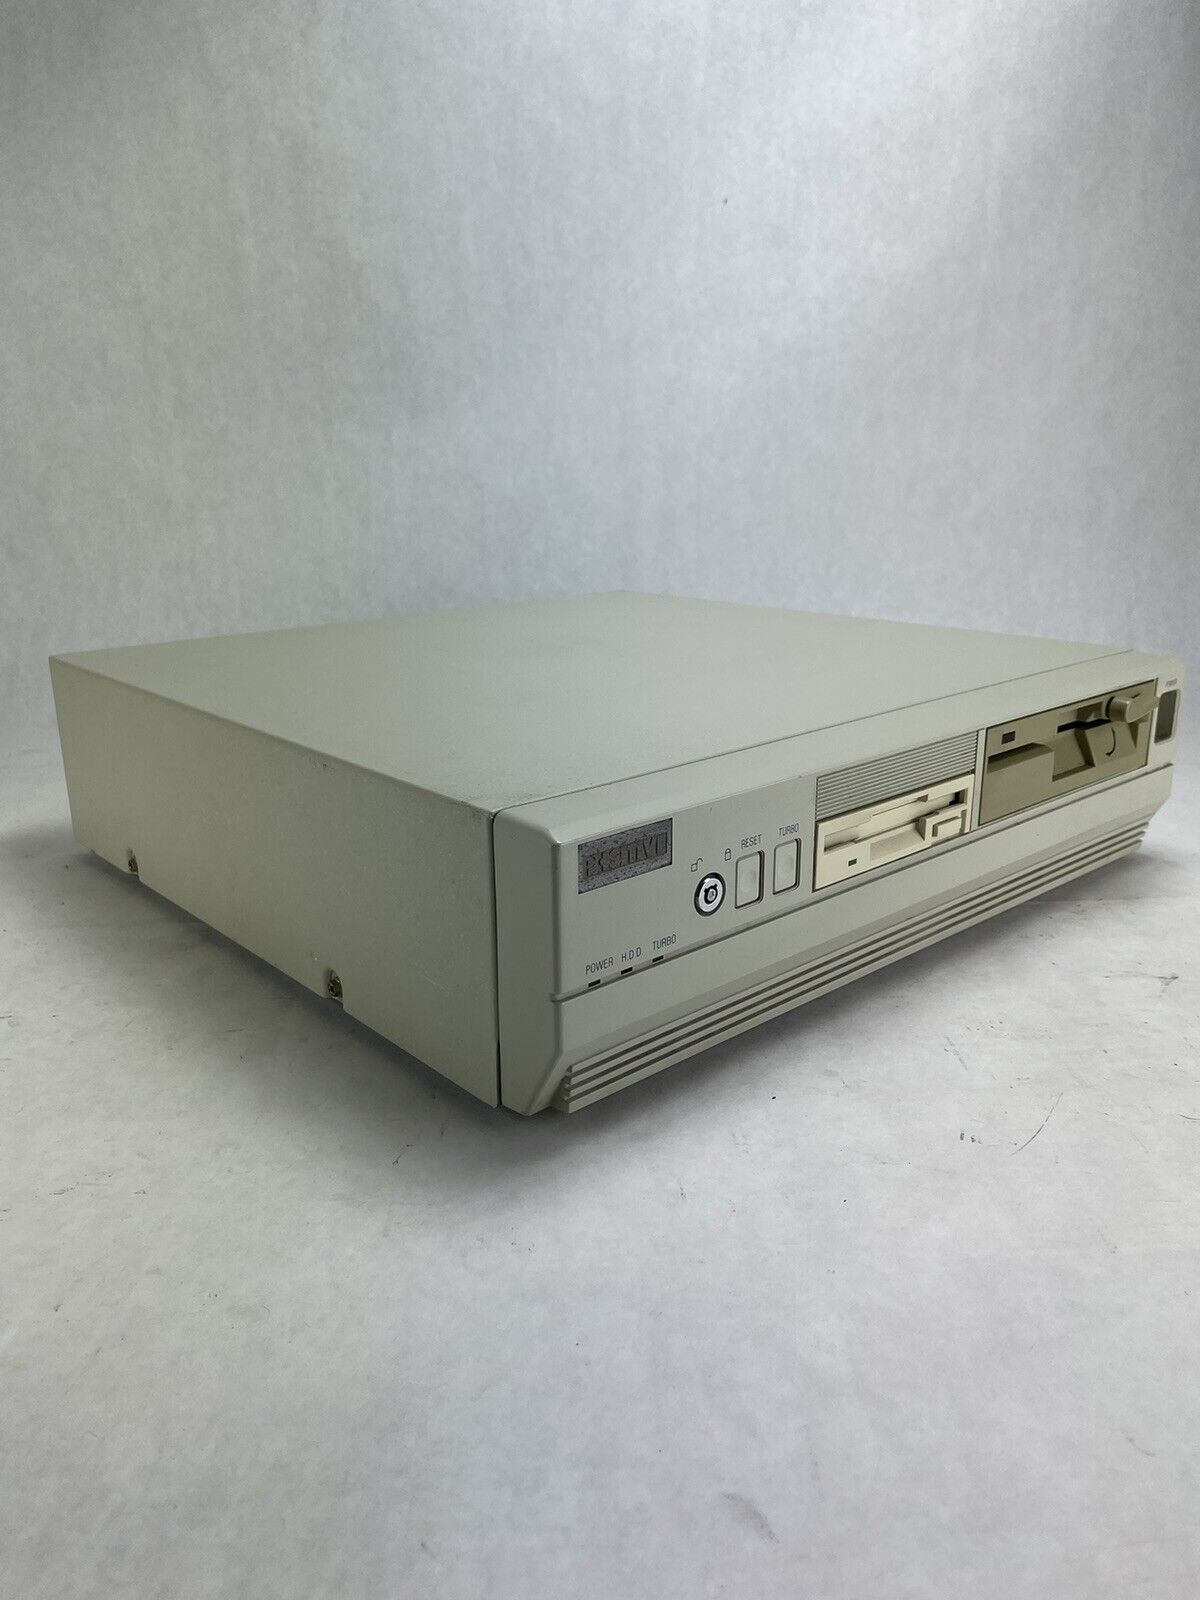 PCSITIVE MB-303 DT Intel 80386DX 20MHz 2MB RAM No HDD No OS